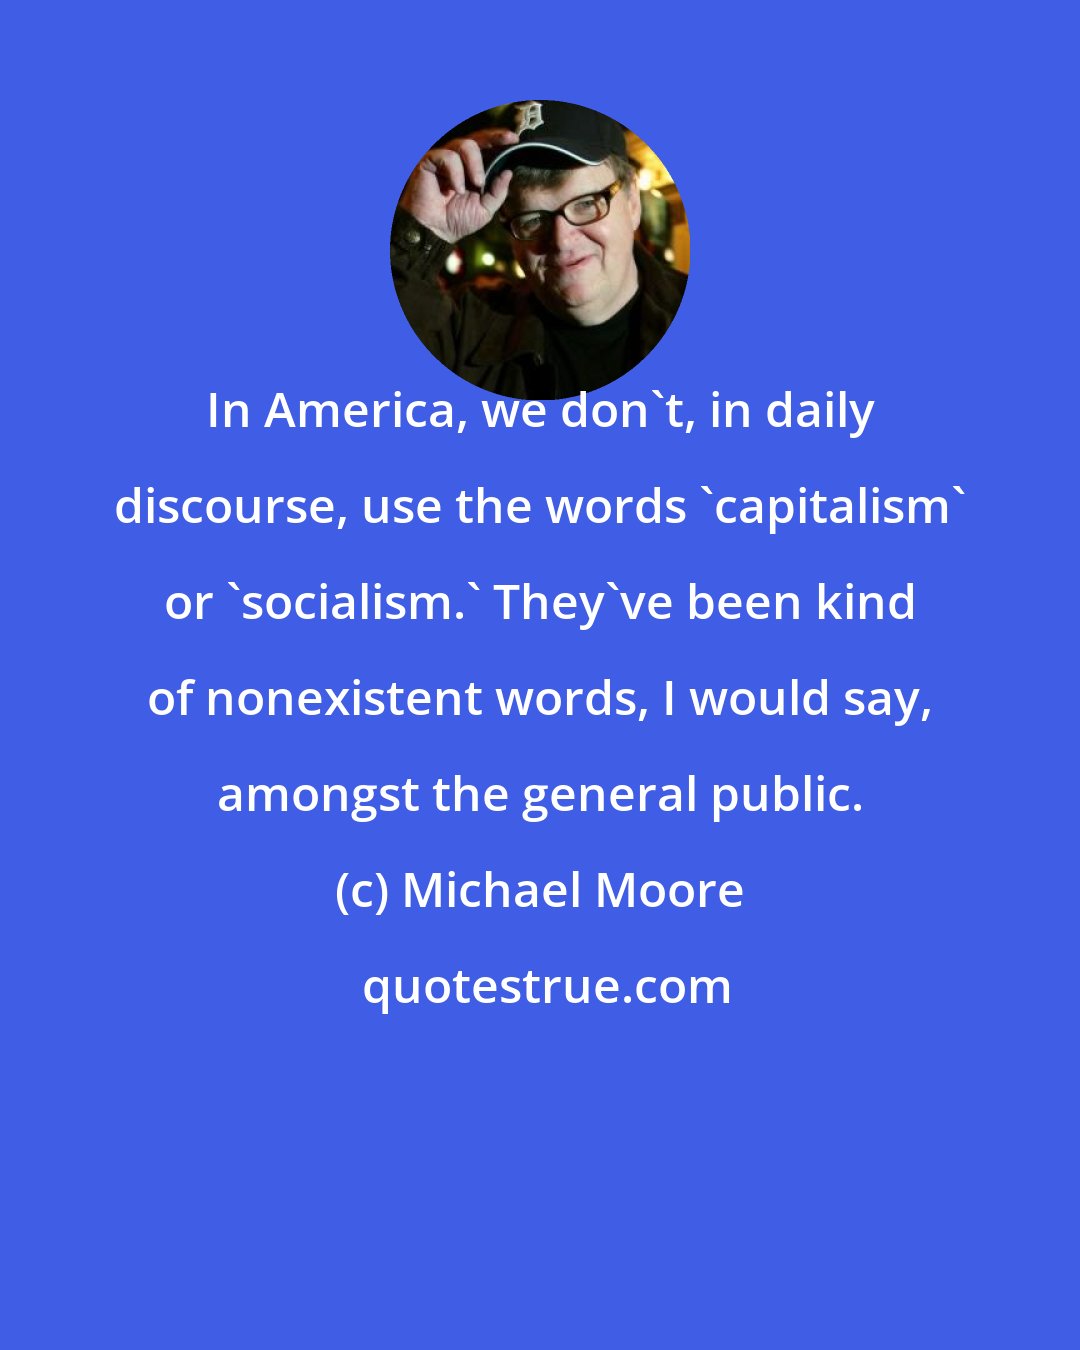 Michael Moore: In America, we don't, in daily discourse, use the words 'capitalism' or 'socialism.' They've been kind of nonexistent words, I would say, amongst the general public.